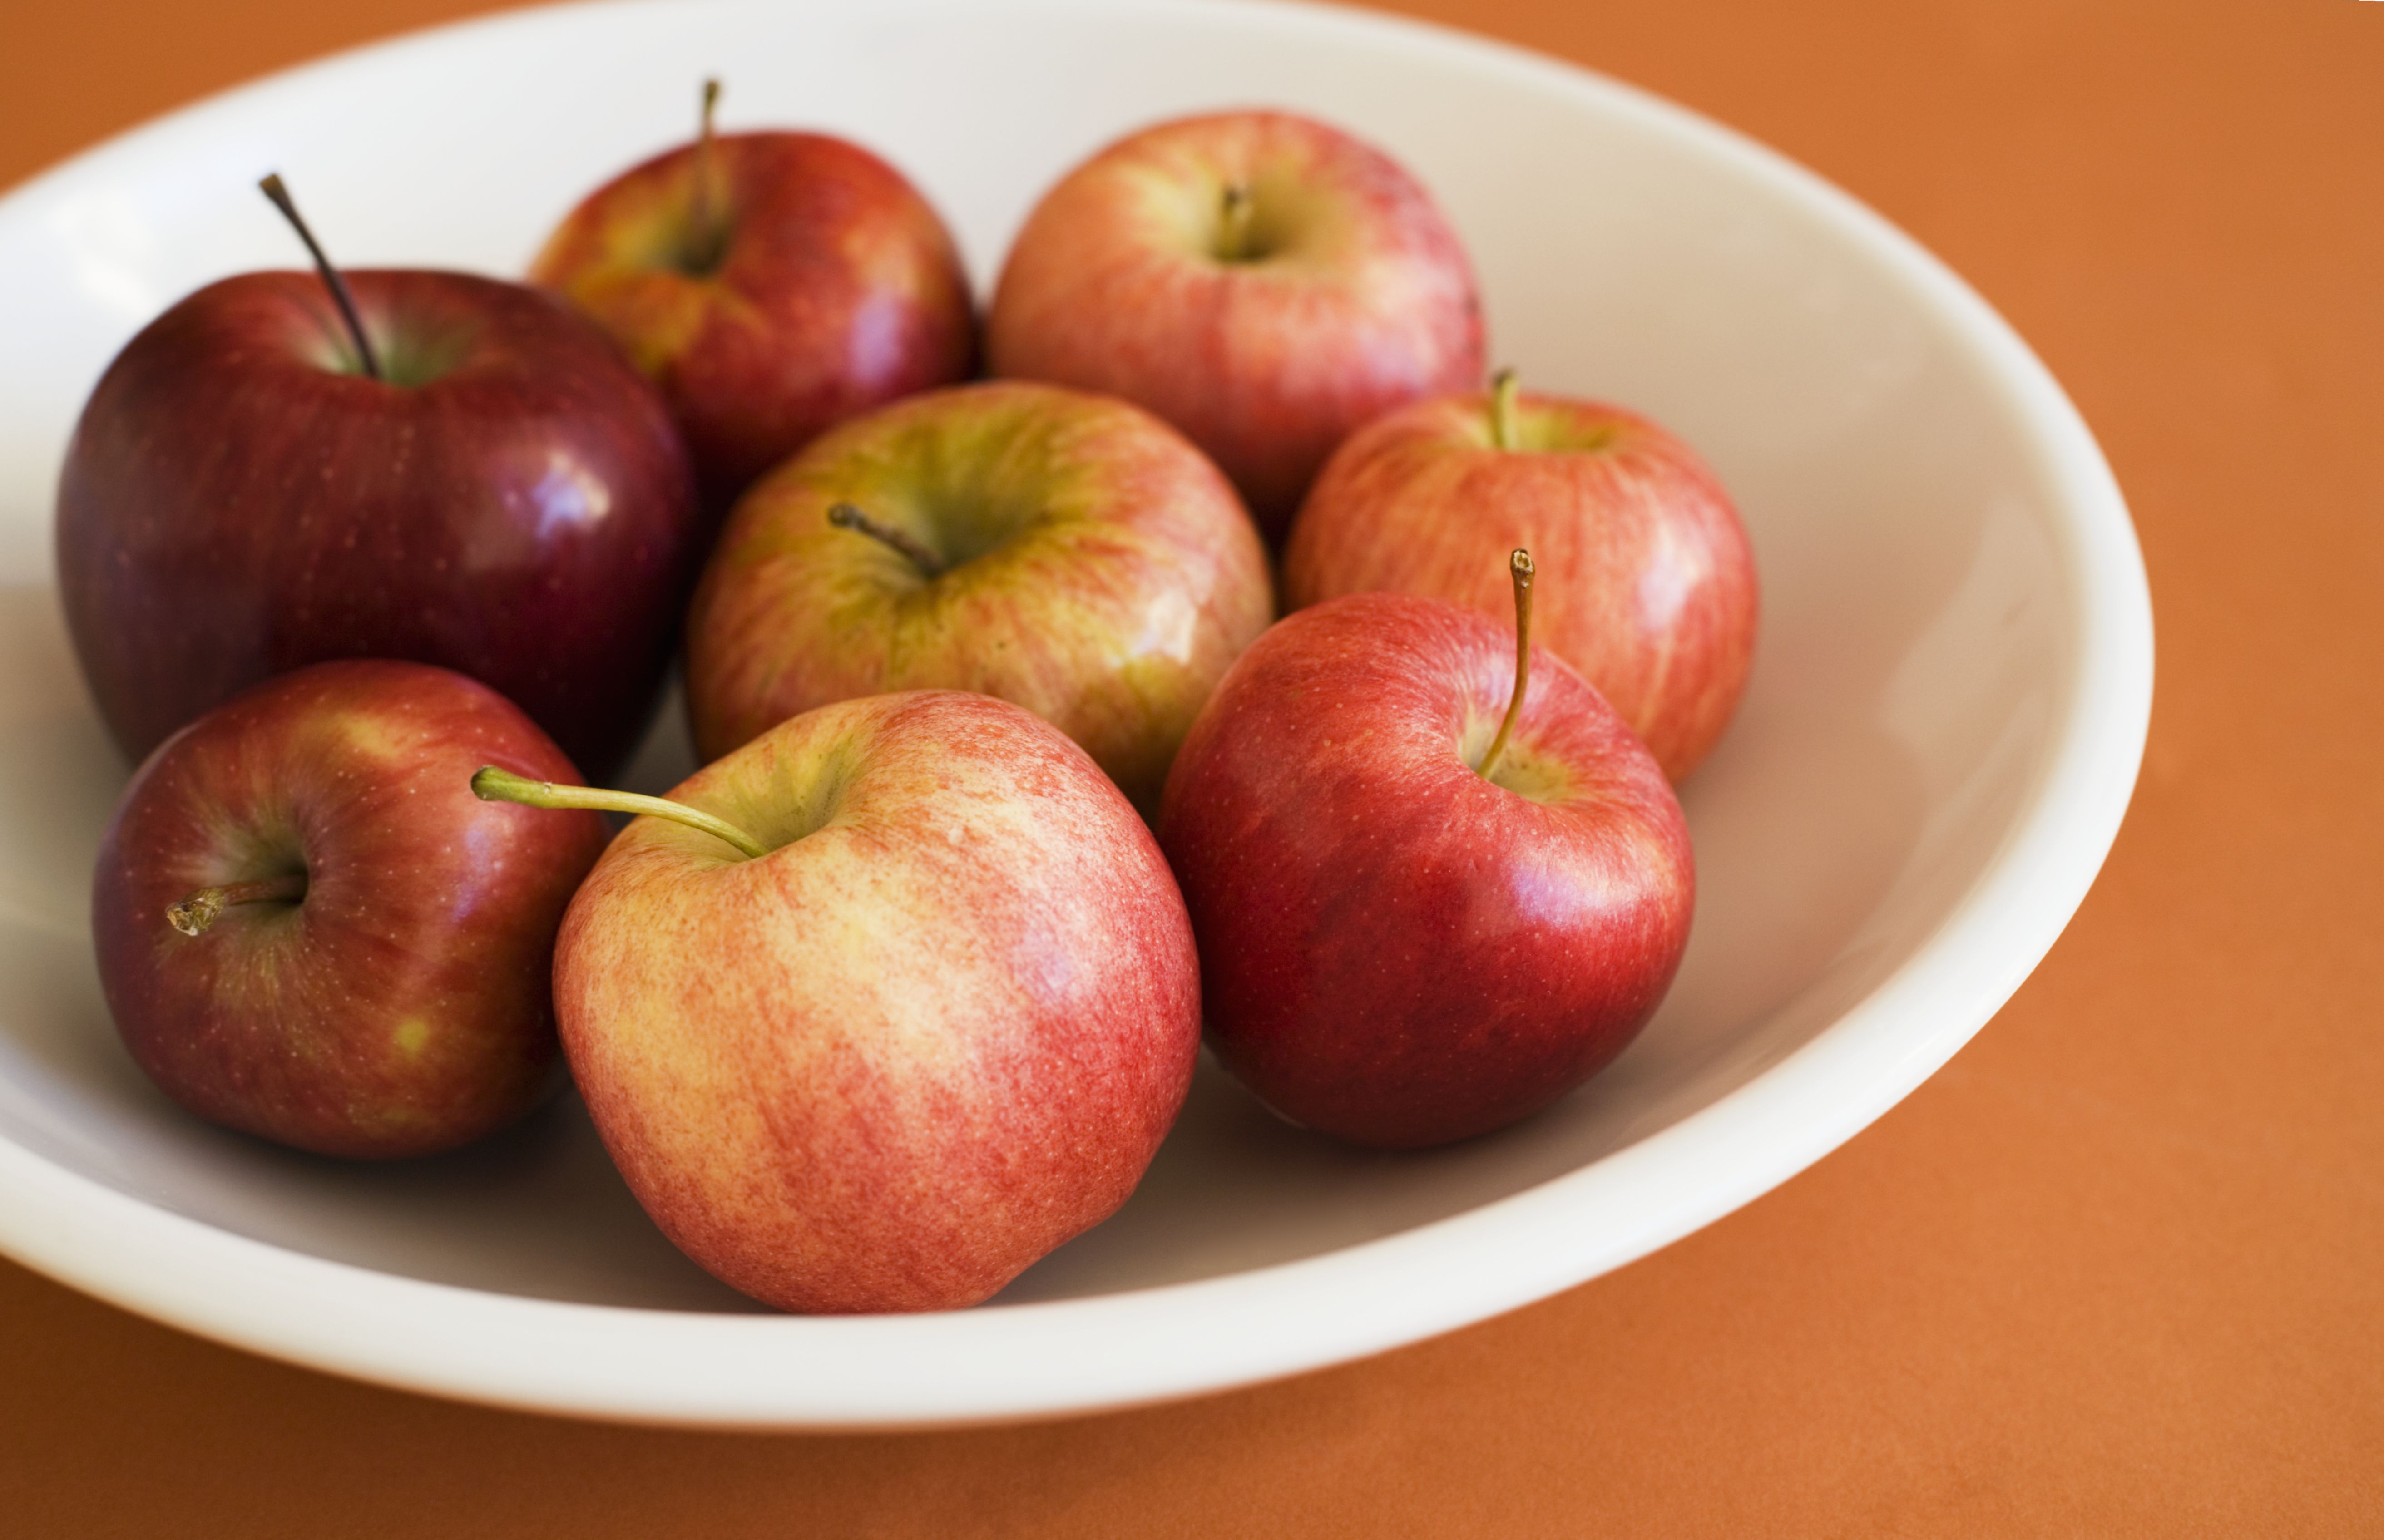 Should Apples Be Refrigerated?